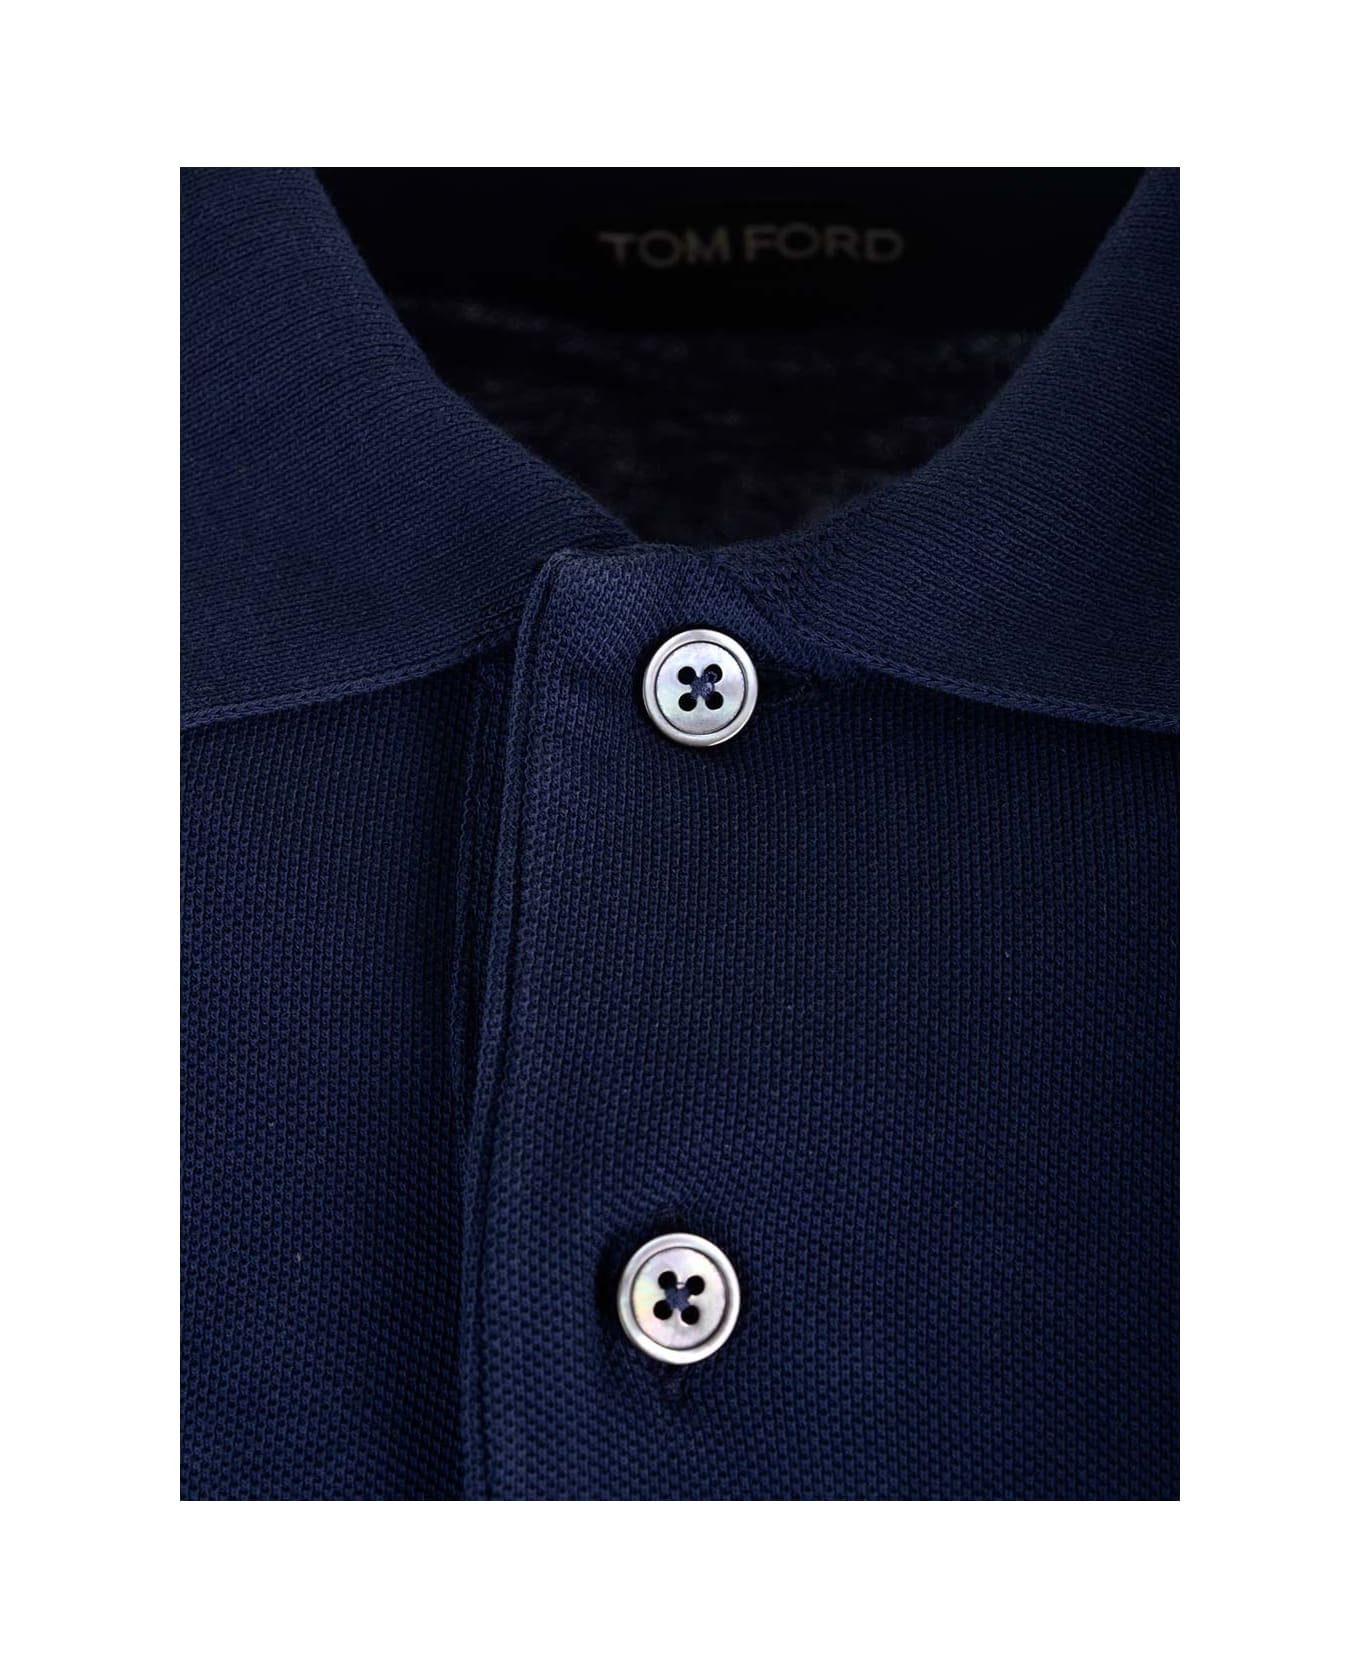 Tom Ford Navy Blue Cotton Polo Shirt - BLUE ポロシャツ